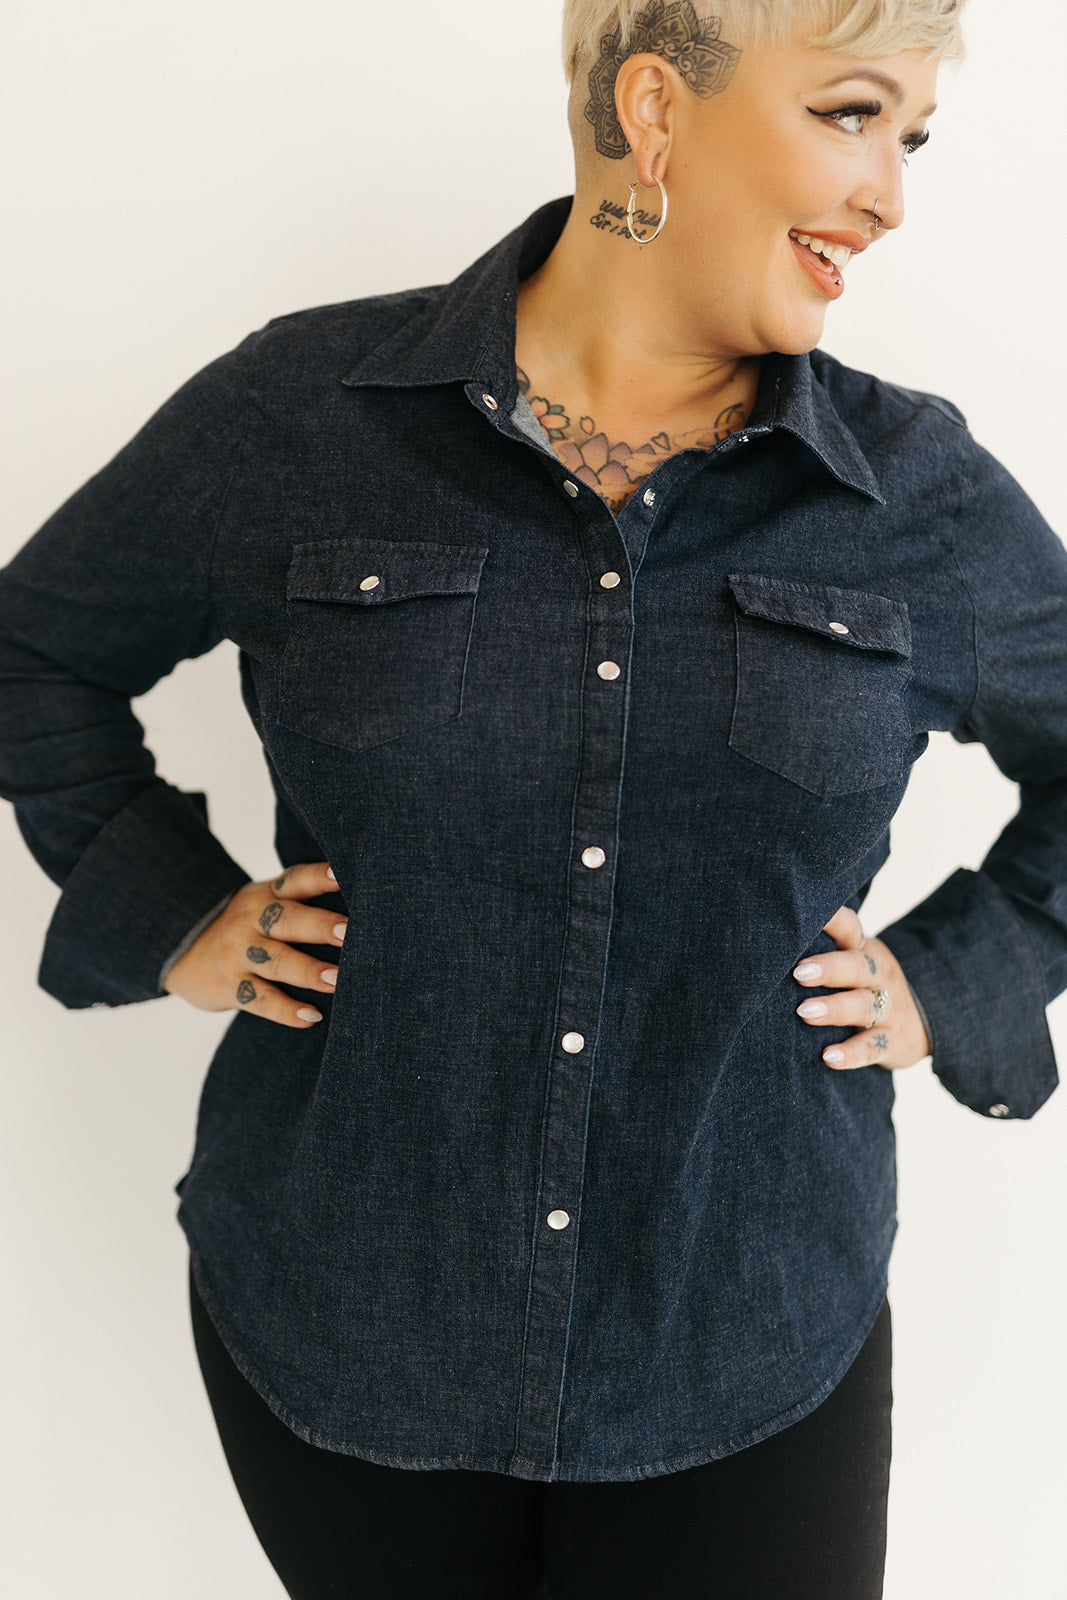 CLASSIC CHAMBRAY DENIM WITH PEARL SNAPS – Tukked Shirts